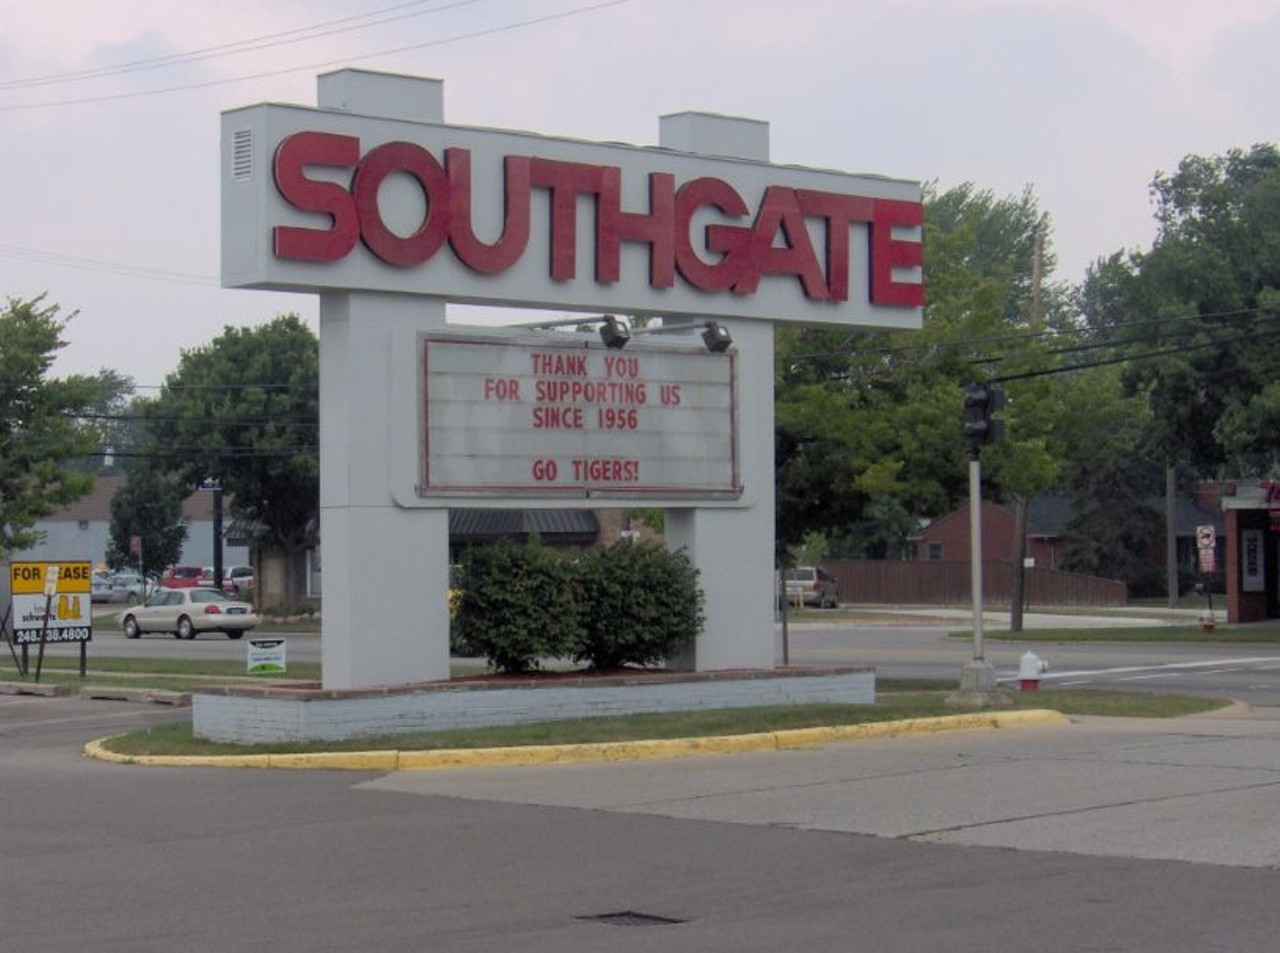 13: Southgate: The Dining Capital of Downriver
OK, we don&#146;t intend to throw shade on Downriver, because that&#146;s been done enough, right? But at least Lincoln Park earns its stripes as "Crossroads of Downriver." But is Southgate really a Division One Downriver dining destination? Sure, there's Subway, a few McDonald's, and some KFCs, Taco Bells, and Arby's? But even that sports bar where they'll cook you a 10-pound burger doesn't seem to quite put it over the top. Did we miss something?